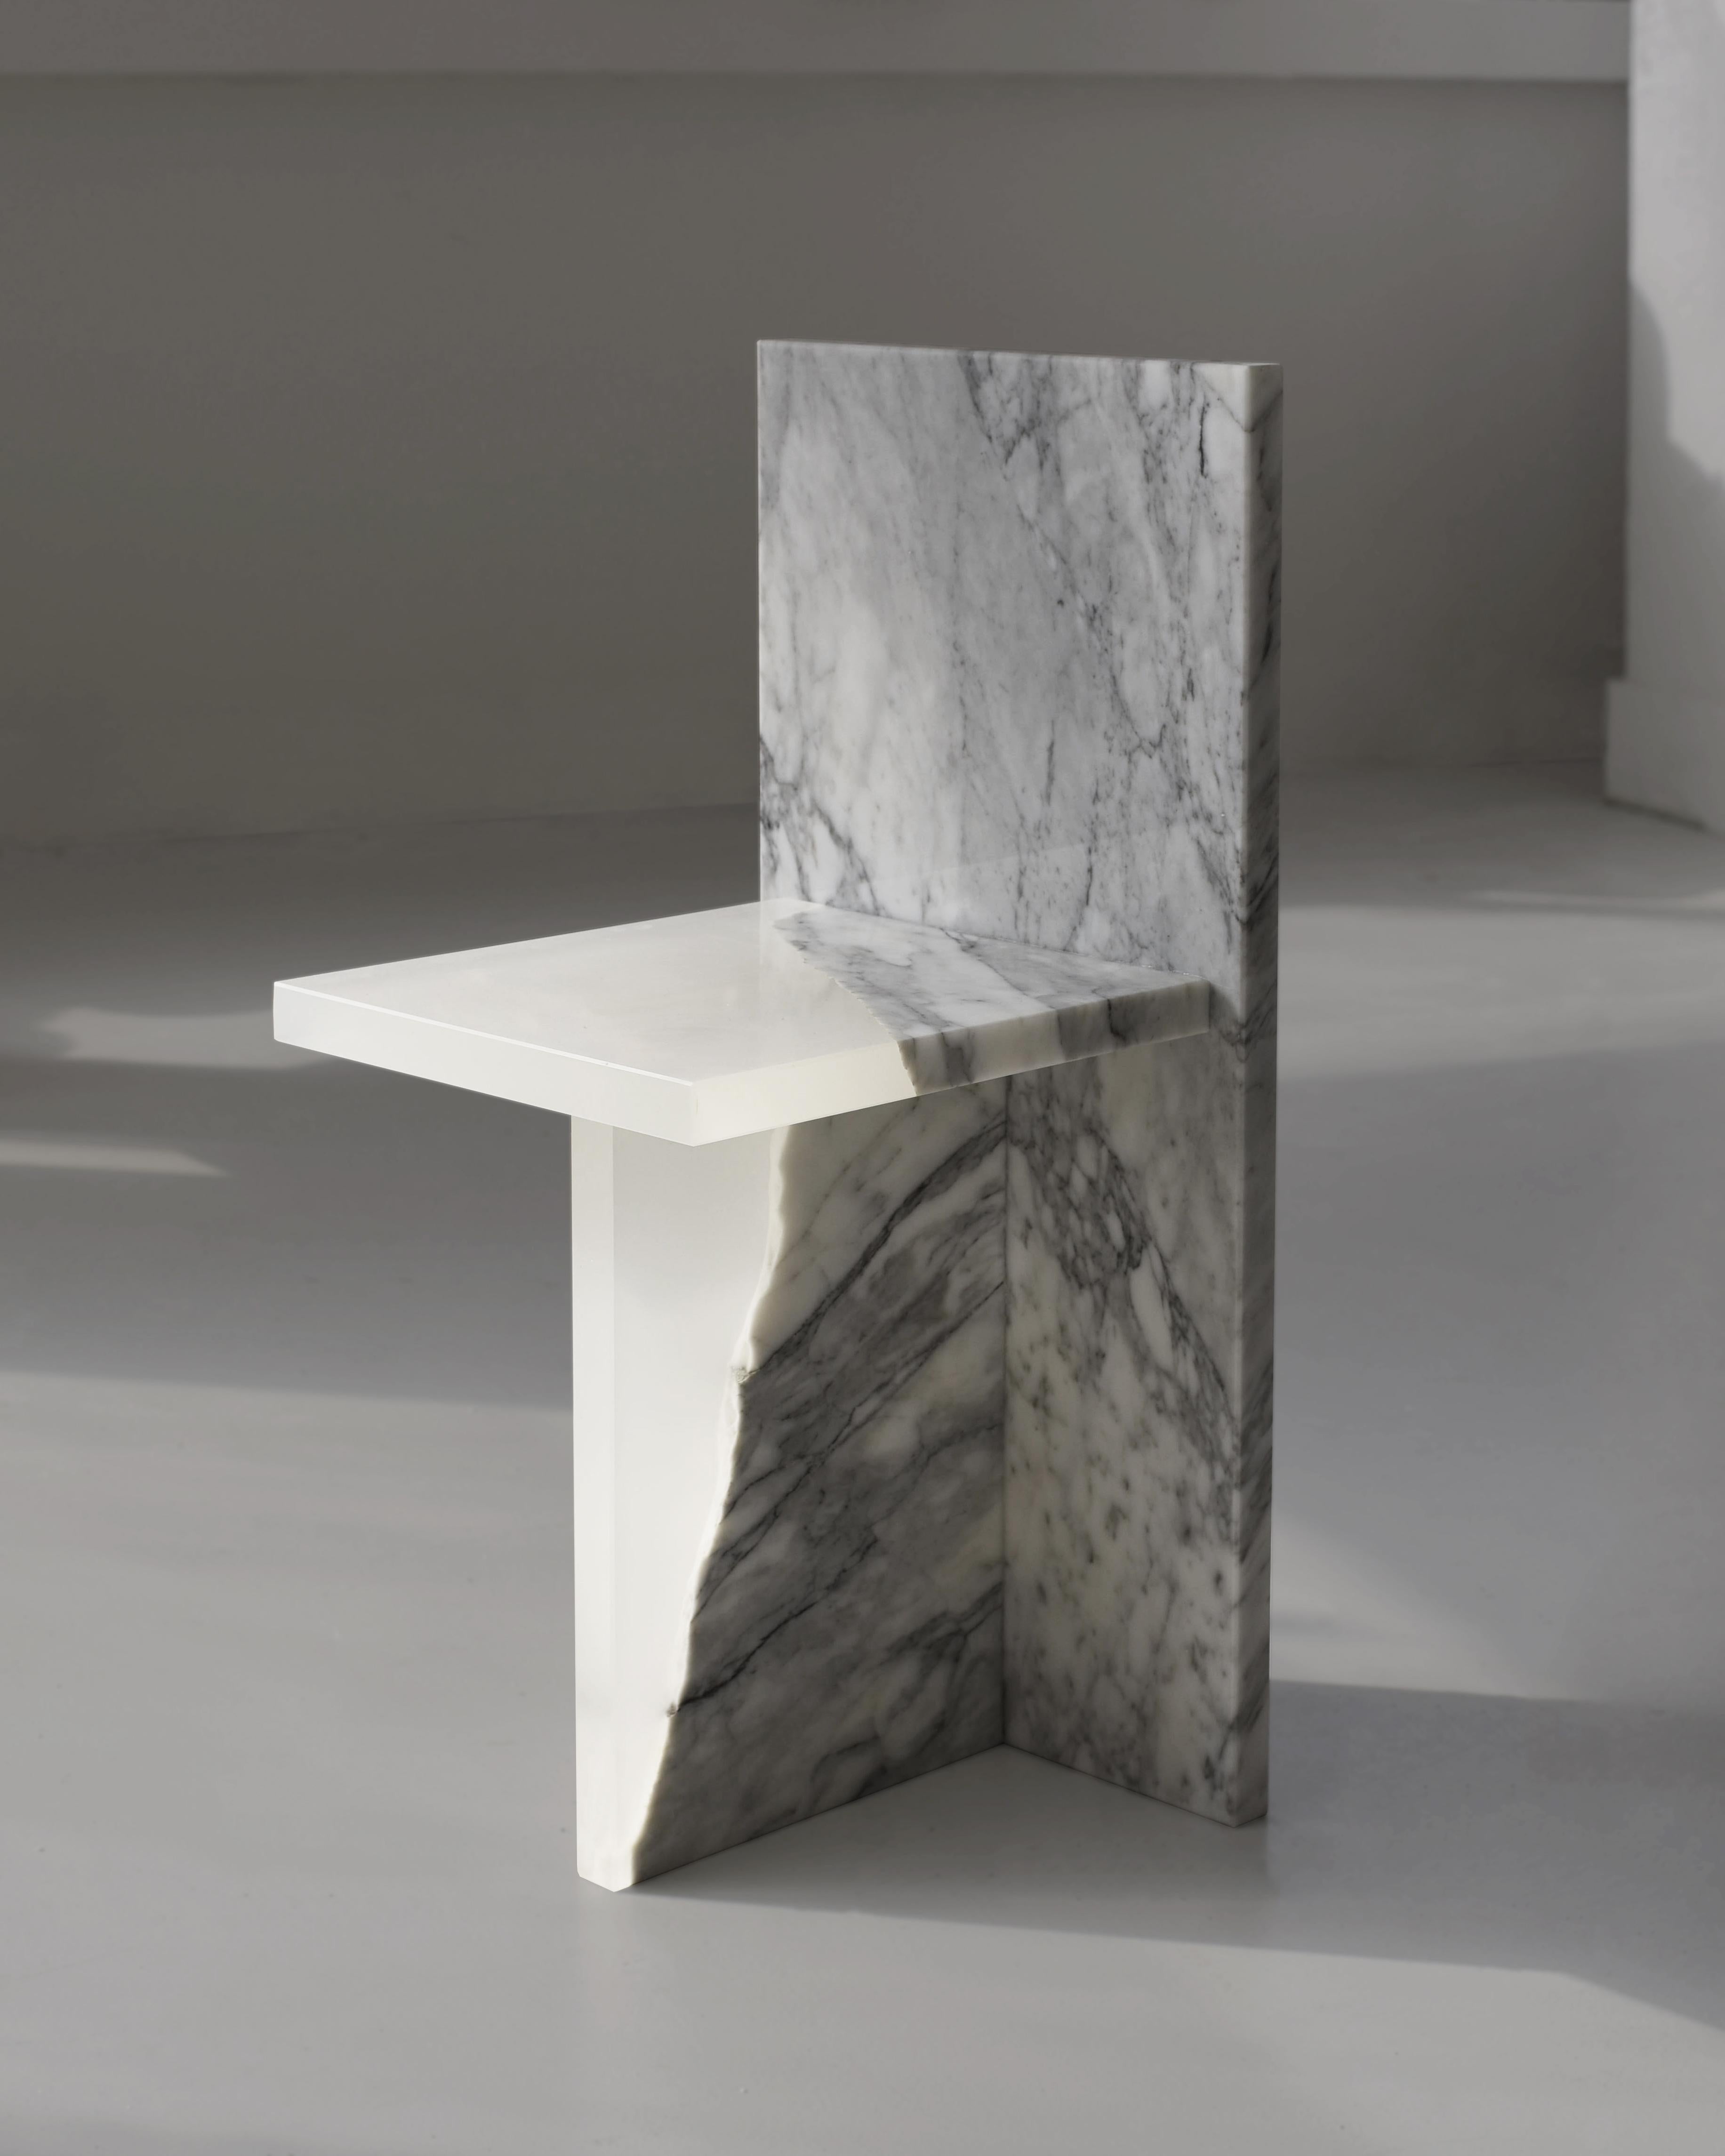 Korean White Crystal Resin and Marble, Fragment Chair, Jang Hea Kyoung